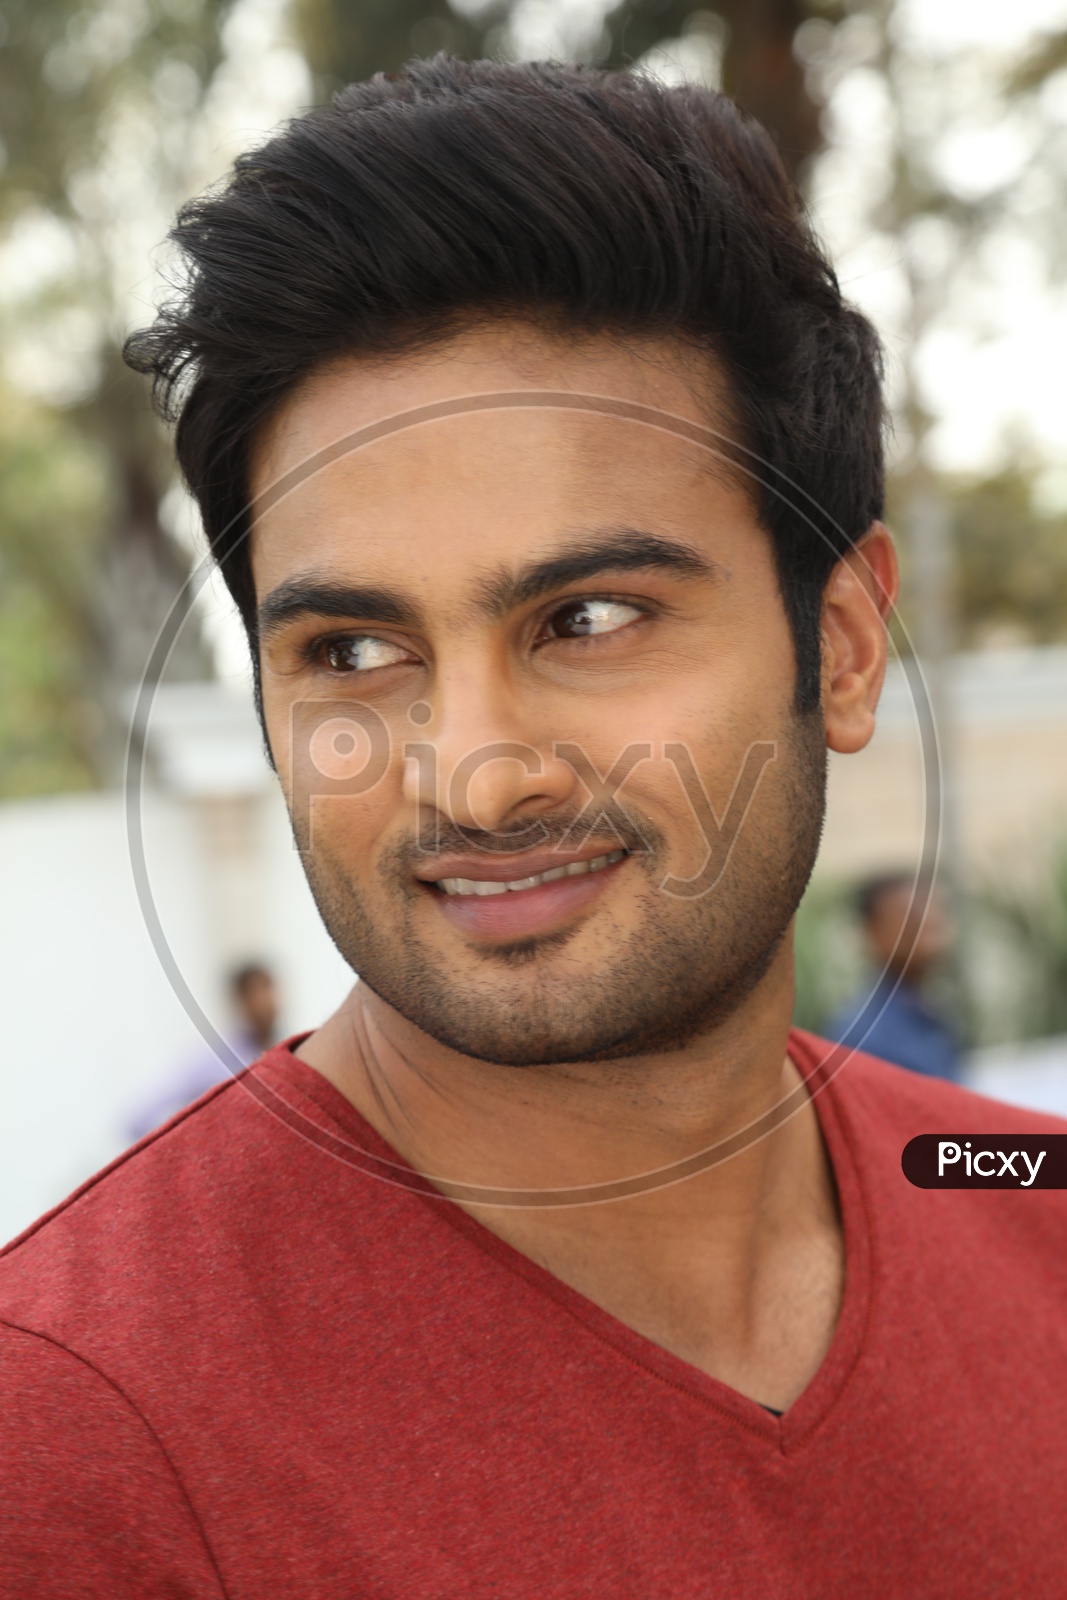 Sudheer Babu shows quirky use of hammer in the gym